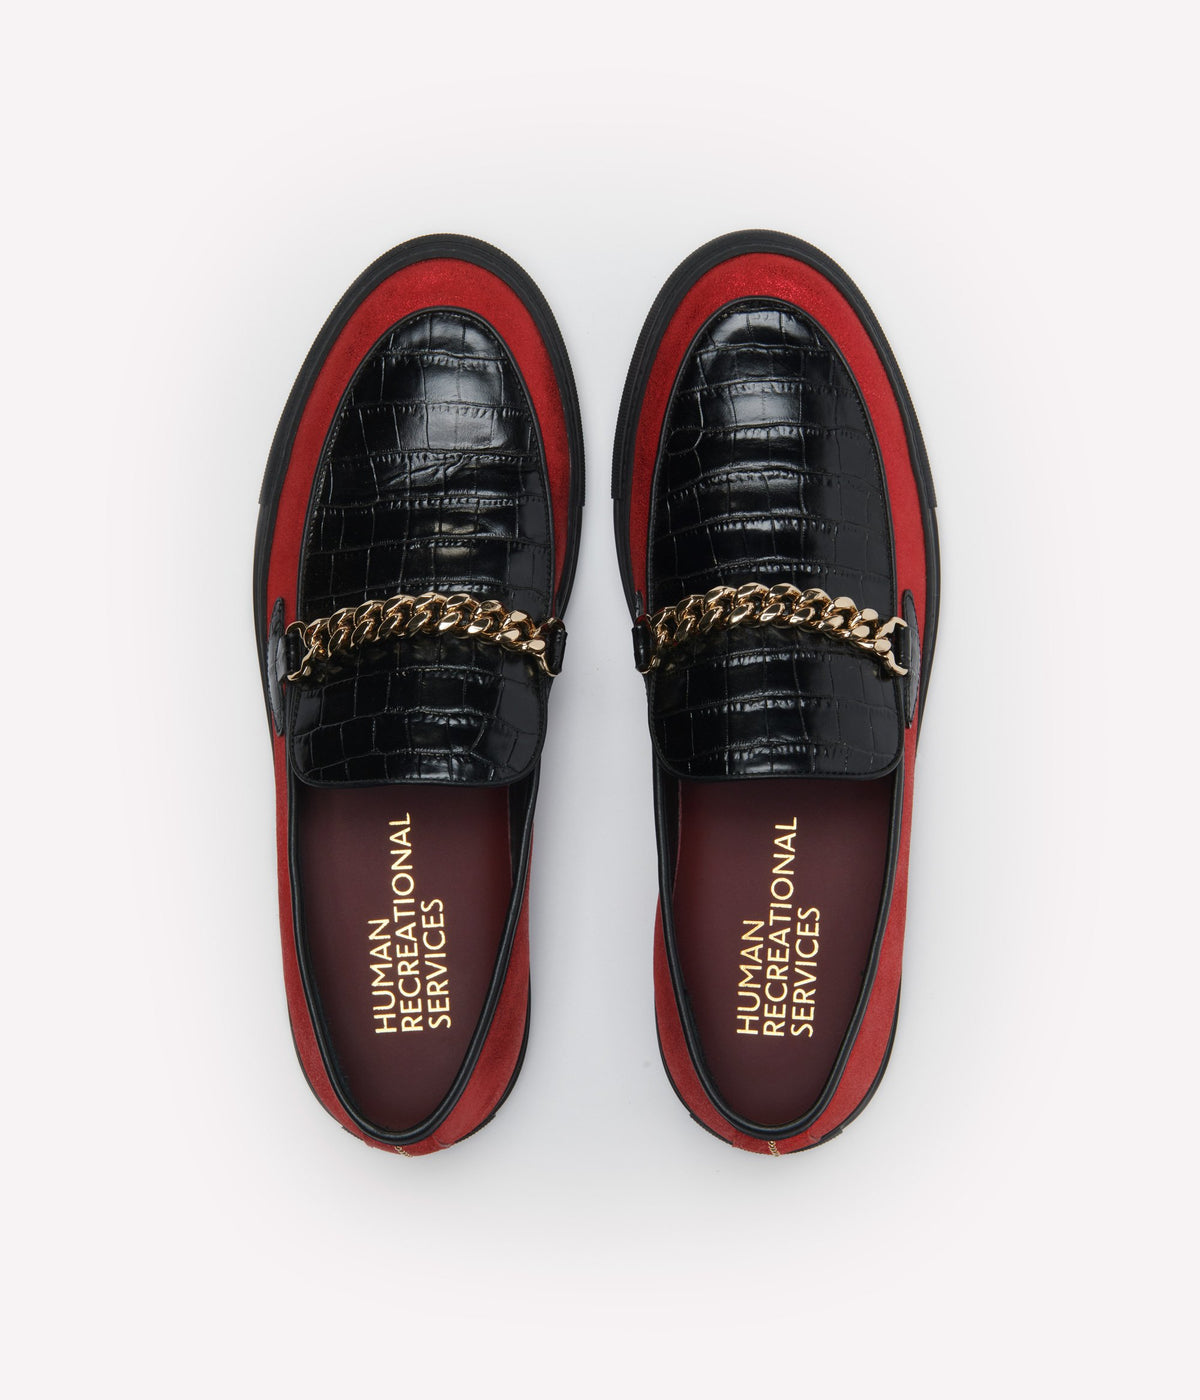 HUMAN RECREATIONAL SERVICES EL DORADO IN RED AND BLACK WITH A CUBAN LINK CHAIN